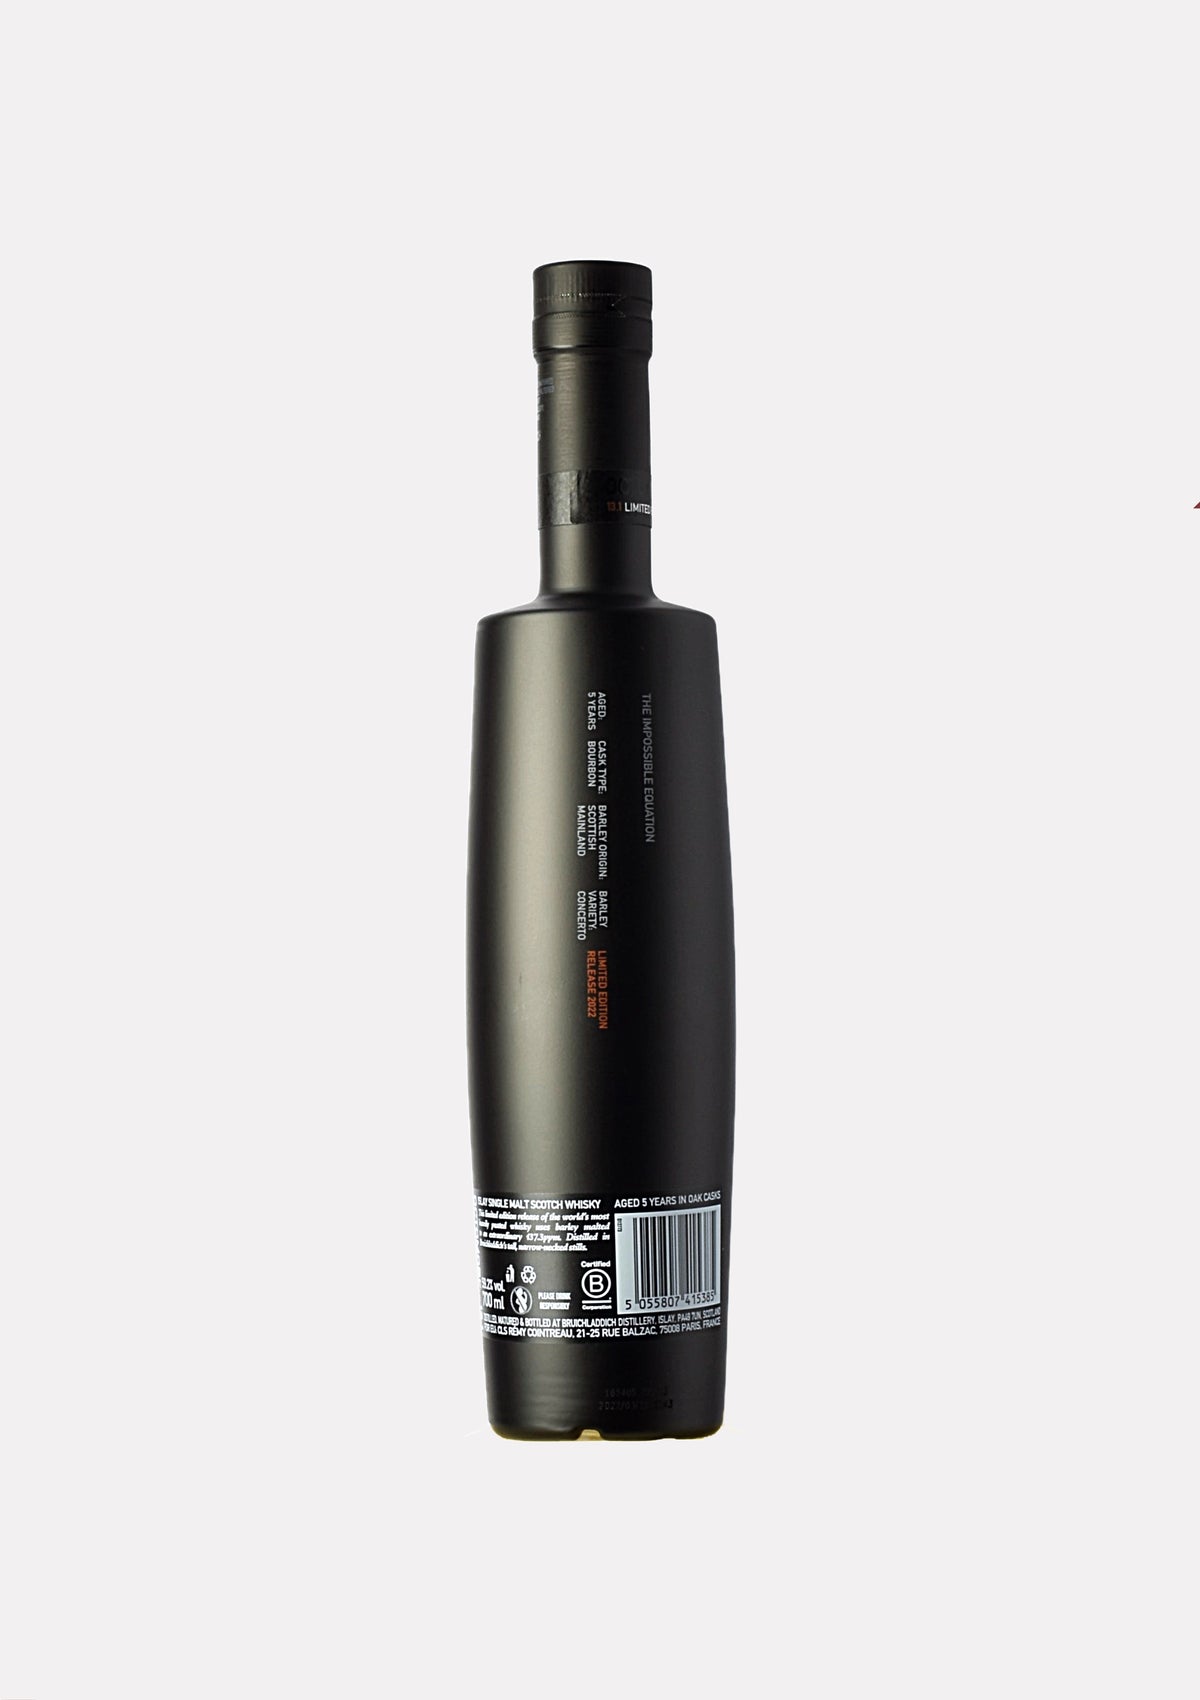 Octomore 13.1 137.3 ppm